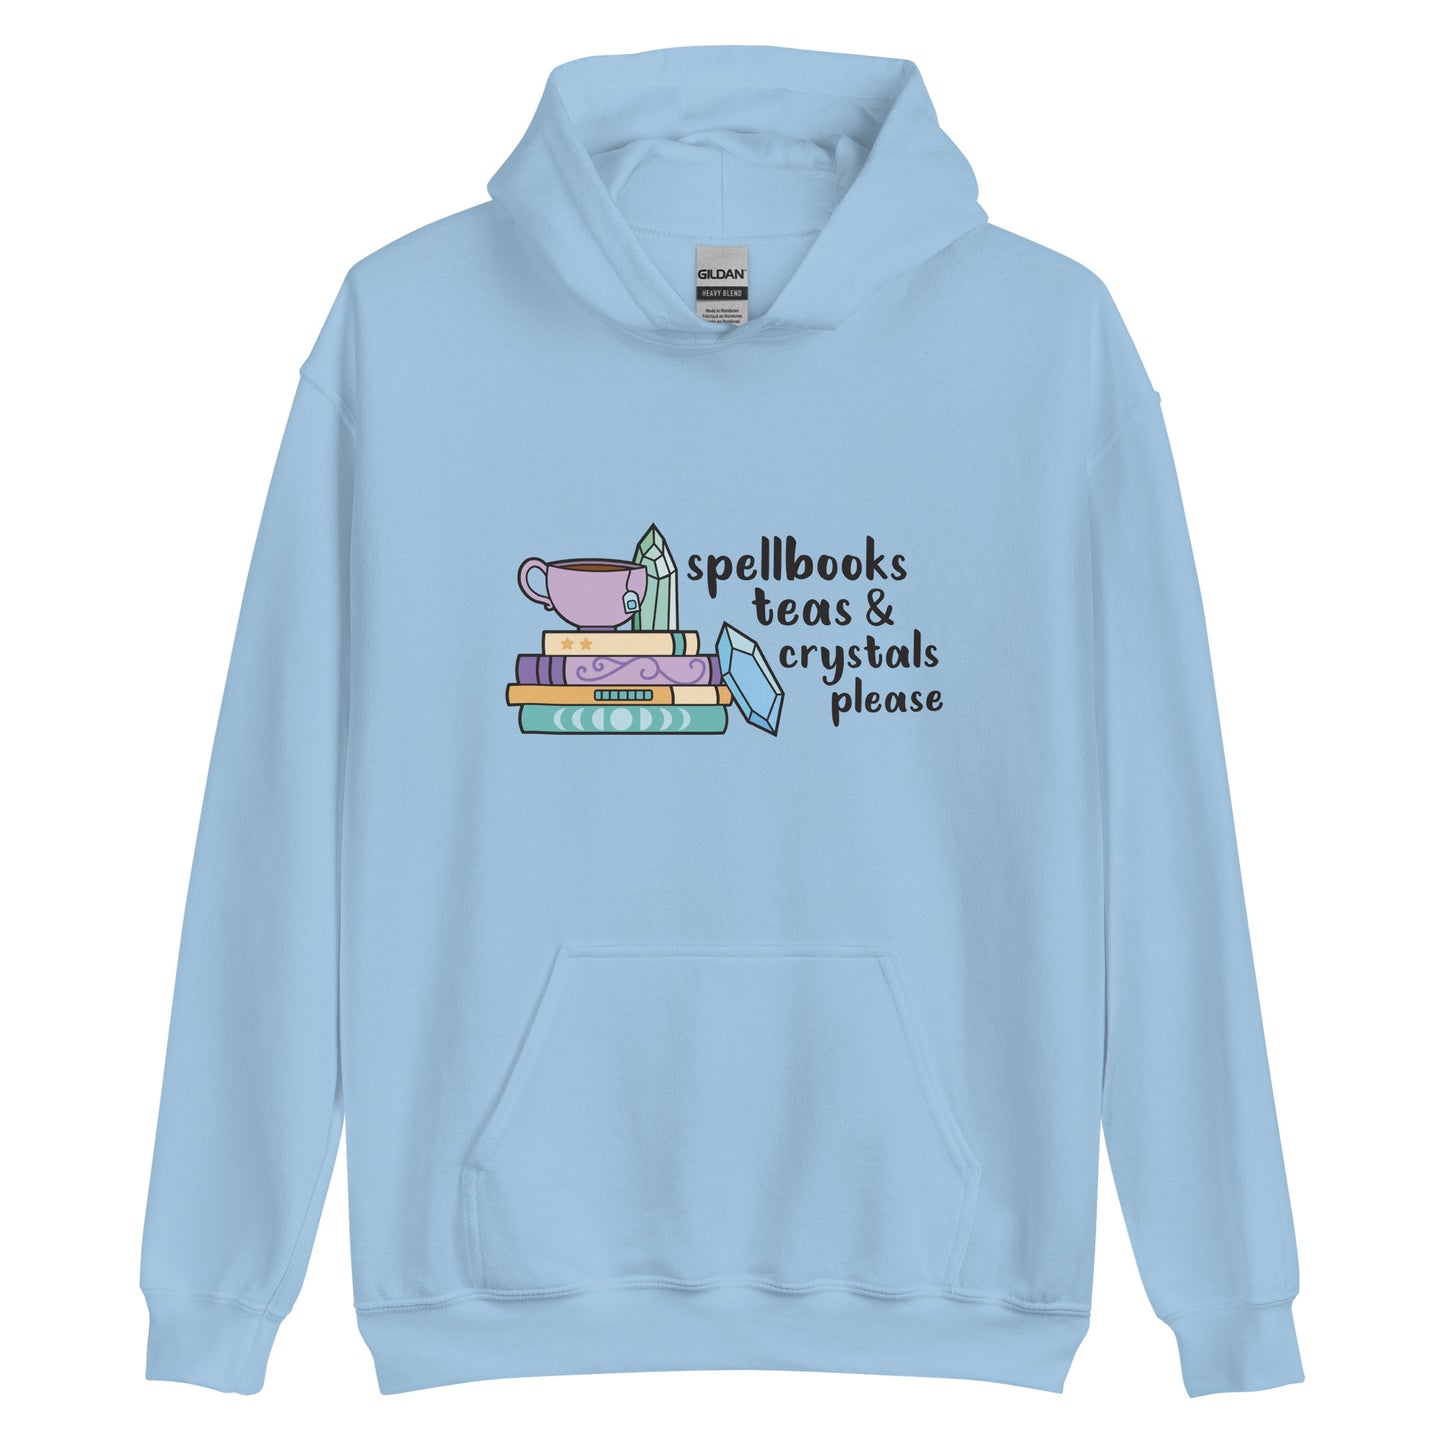 A light blue hooded sweatshirt featuring an illustration of a stack of spellbooks with a teacup and a crystal resting on top. Another crystal rests on the side of the stack, and text next to the illustration reads "Spellbooks, teas & crystals please"